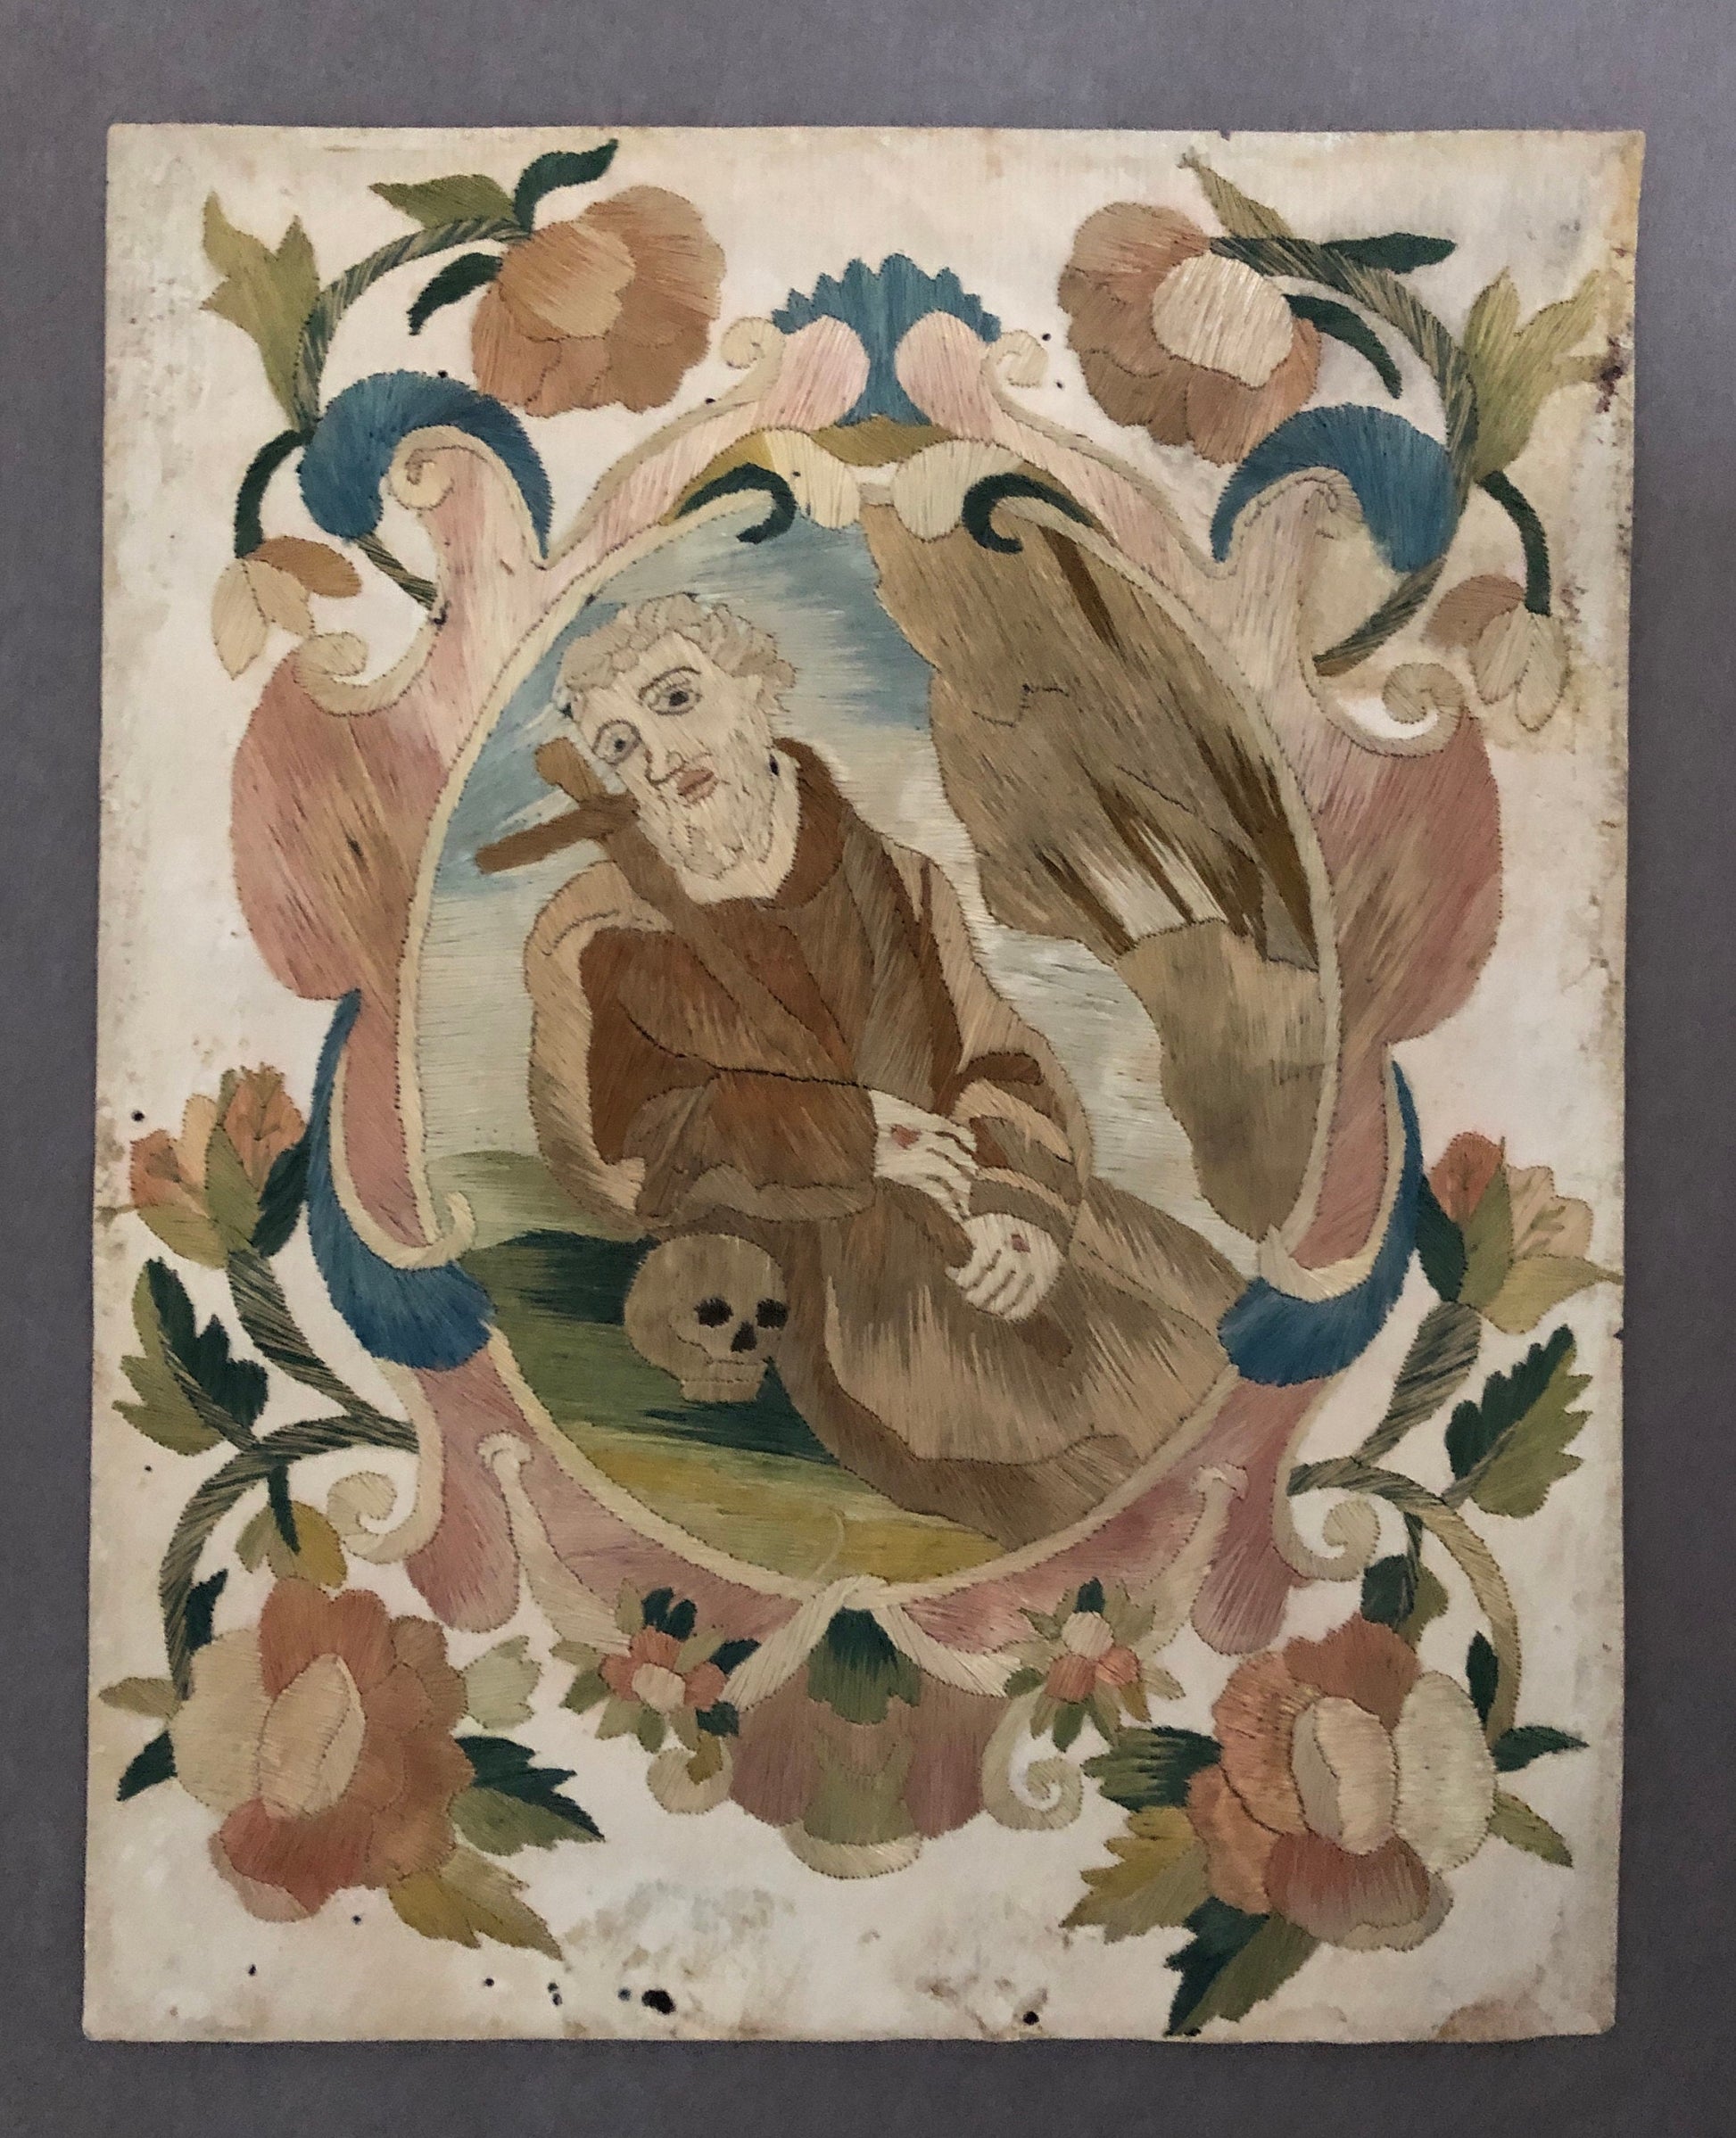 A Remarkably Fine Silk Double Sided Embroidery of a Saint, Possibly St. Francis, With Skull and Stigmata. French 17th Century. 20 x 16 cms.